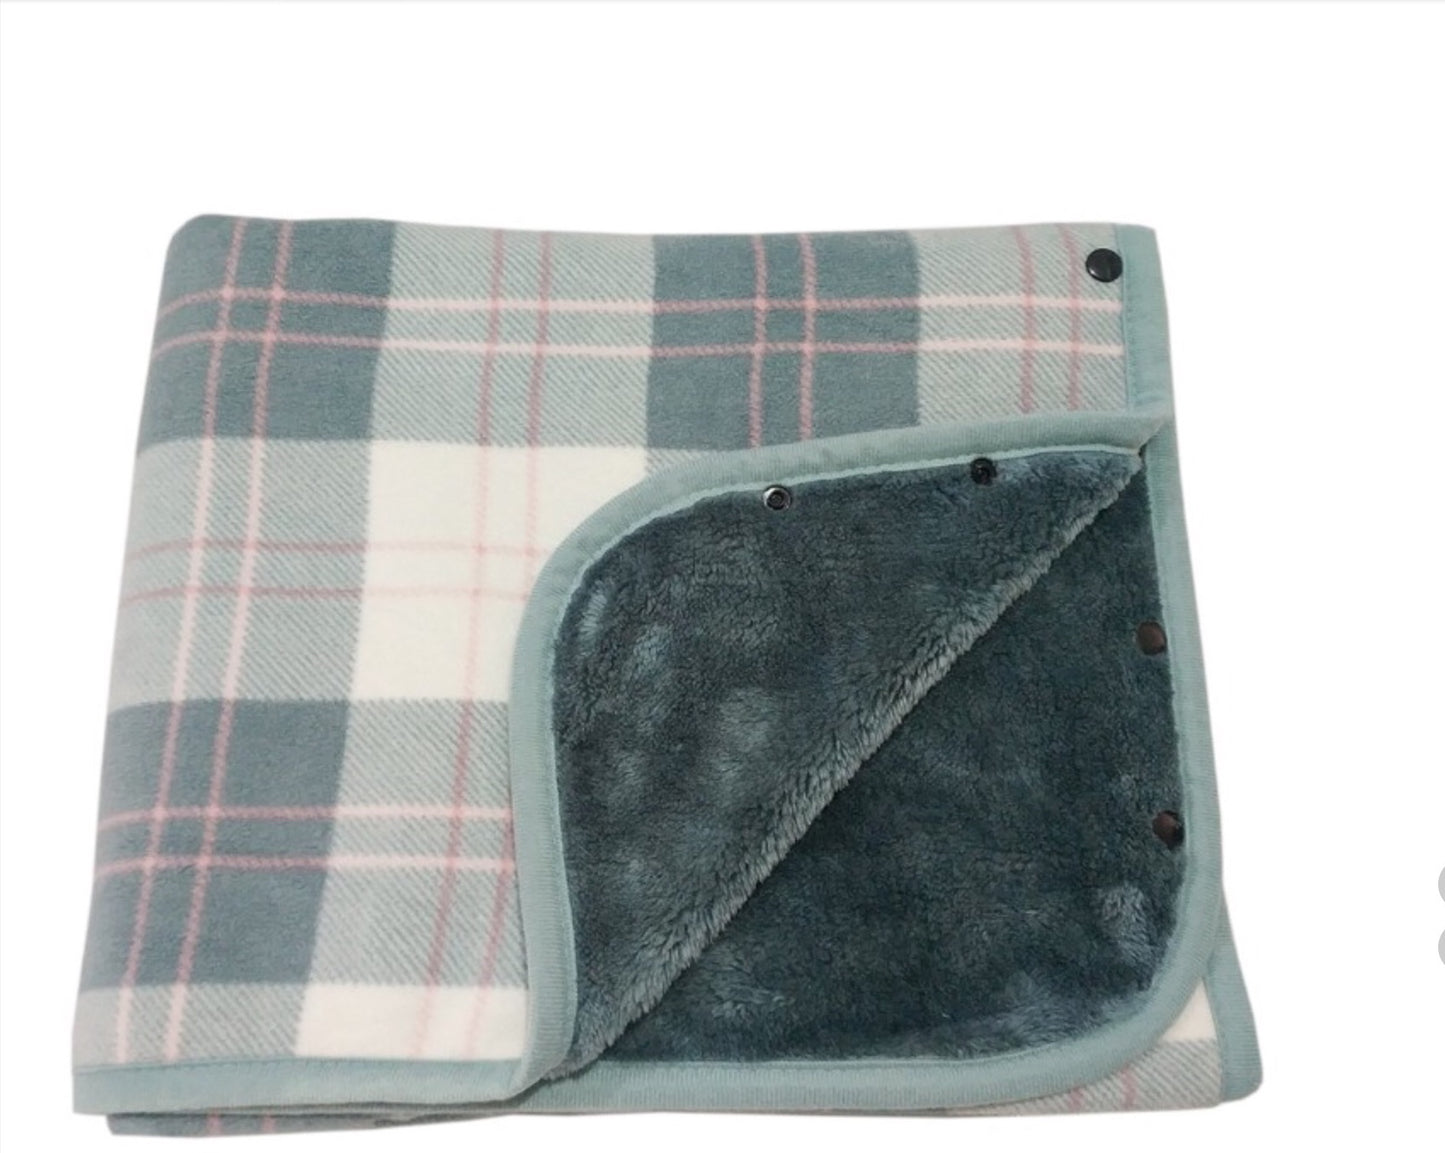 Poncho fleece warm plaid grey and off white  great gift, various colours ,next day shipping